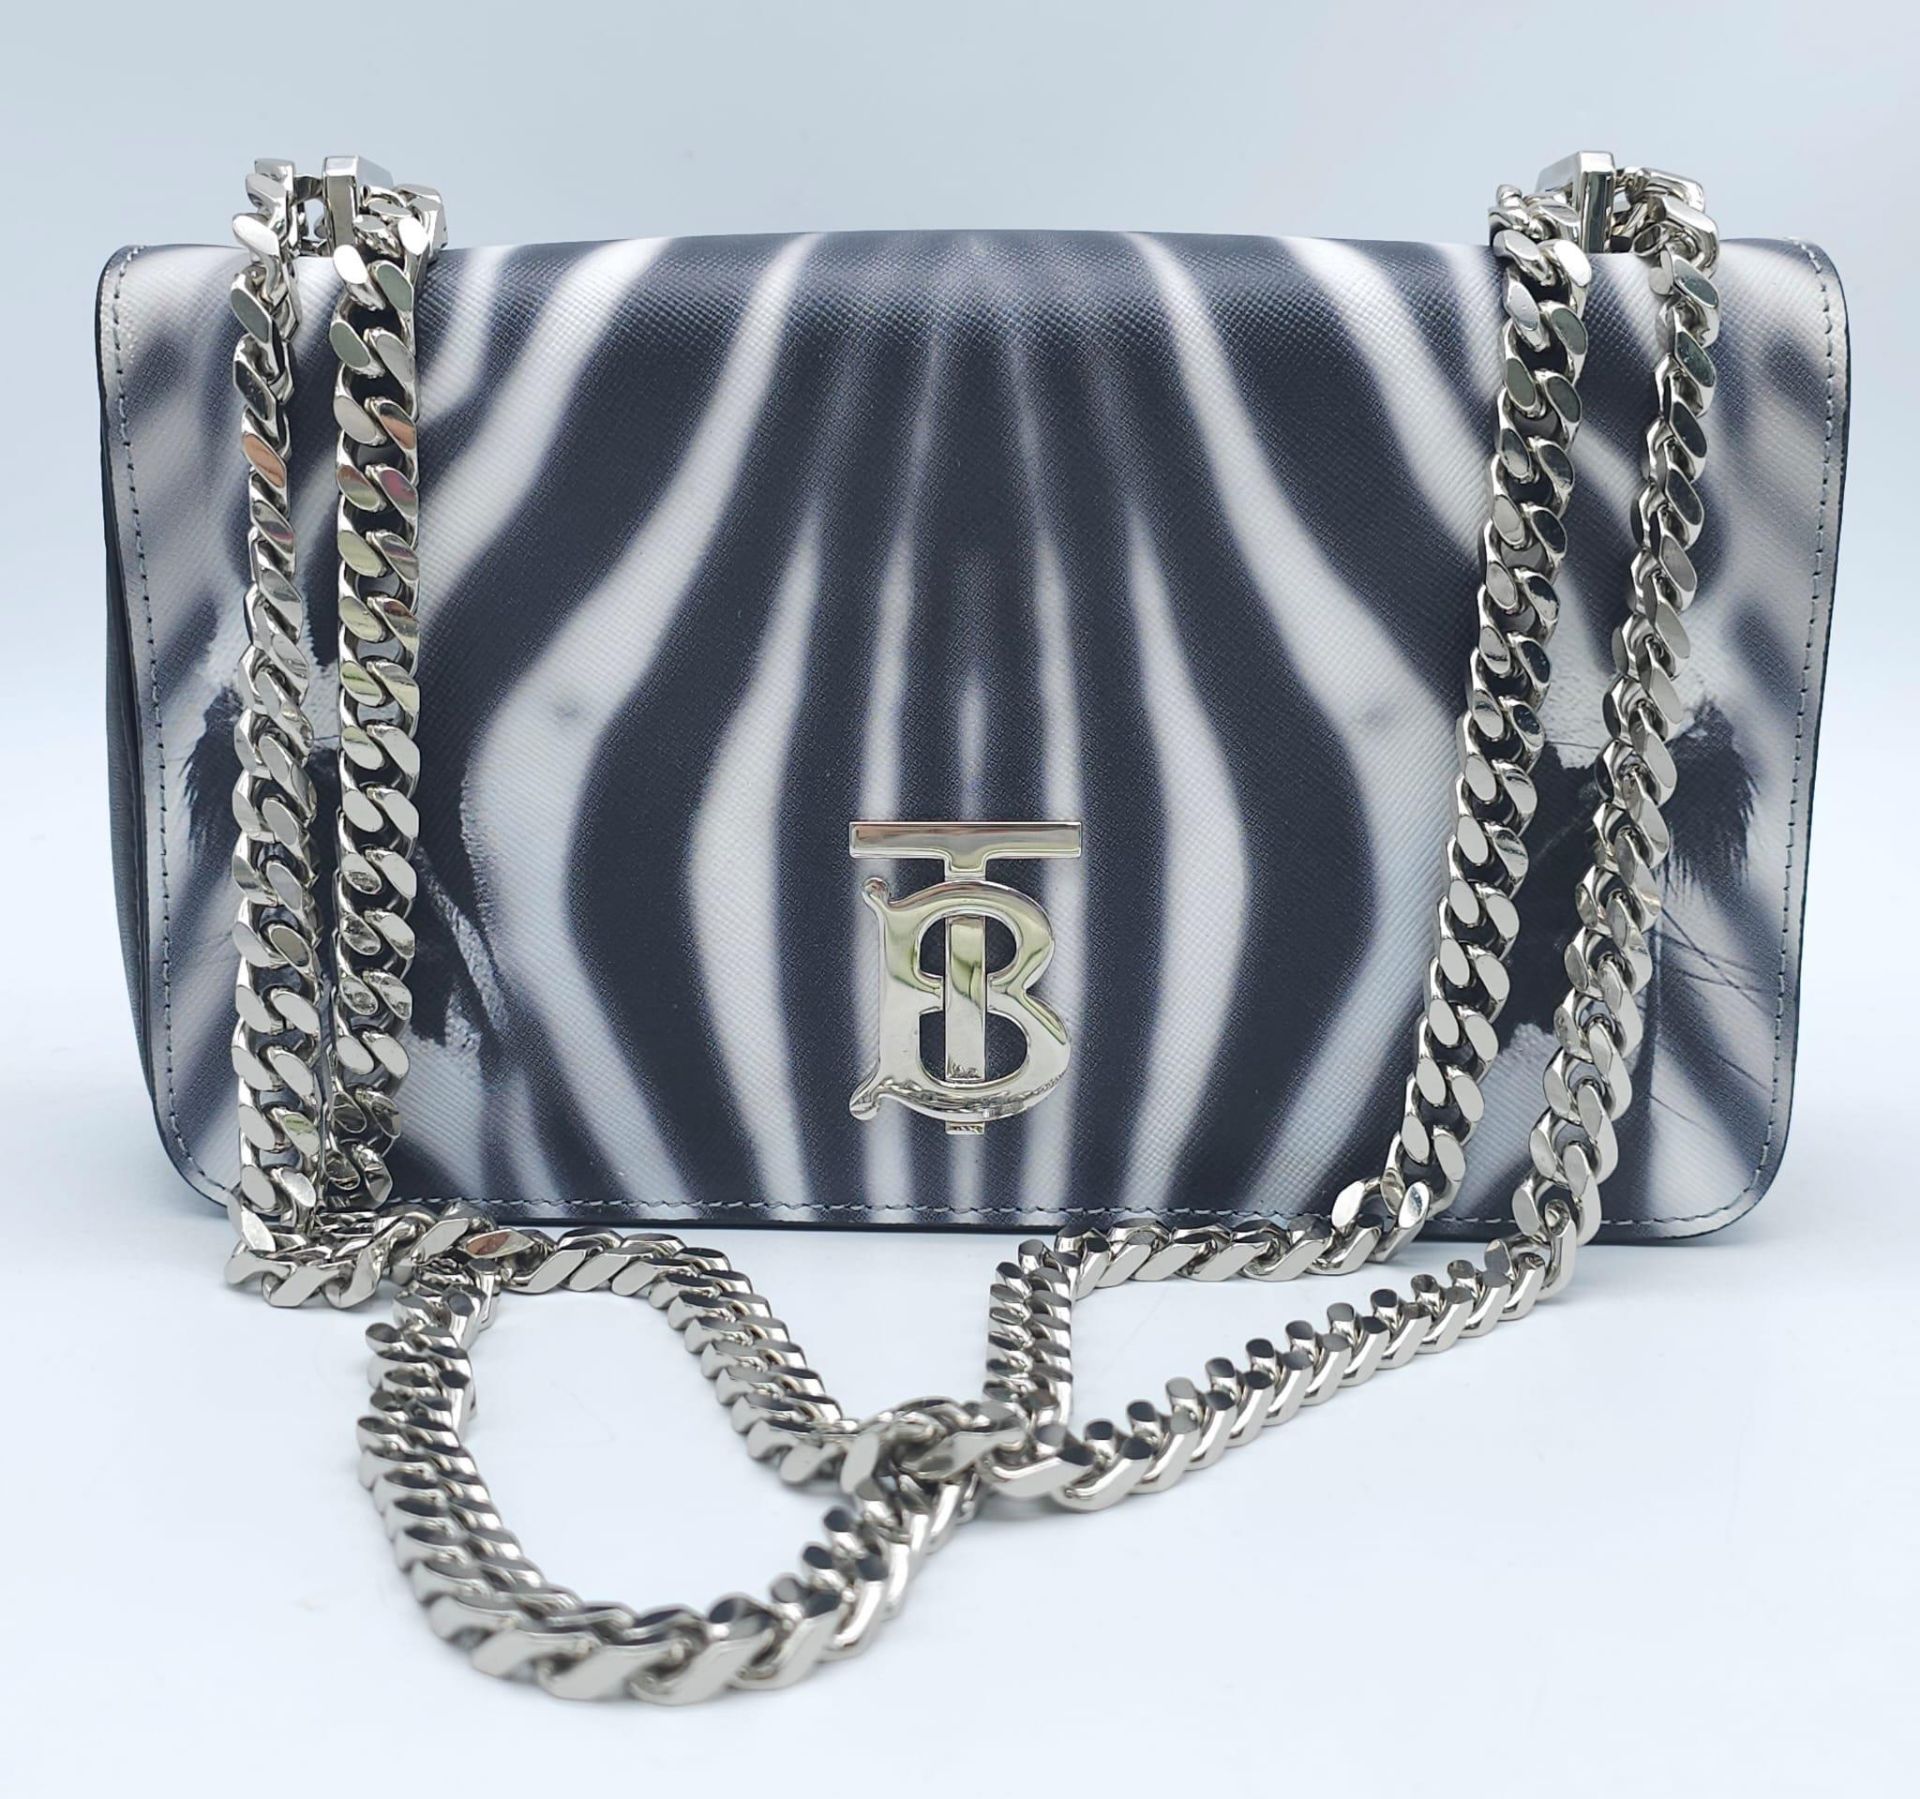 Burberry Zebra Chain Shoulder Bag. Quality leather throughout with a gorgeous print of a Zebra. - Image 2 of 13